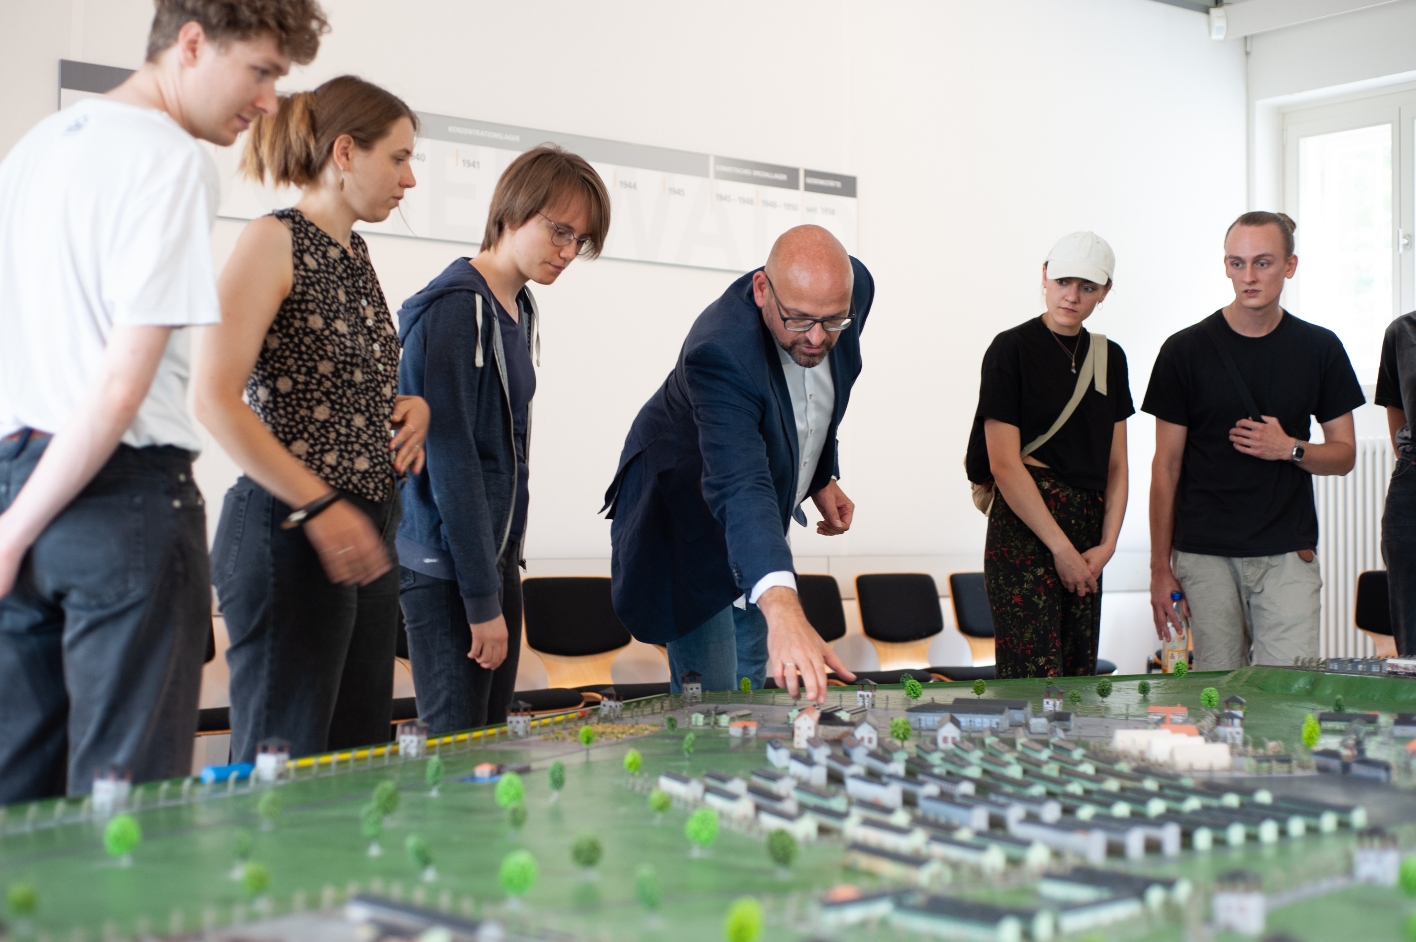 An employee of the memorial points to a model of the concentration camp filling the seminar room. Around the model stand young seminar participants, 5 of whom can be seen in the frame.